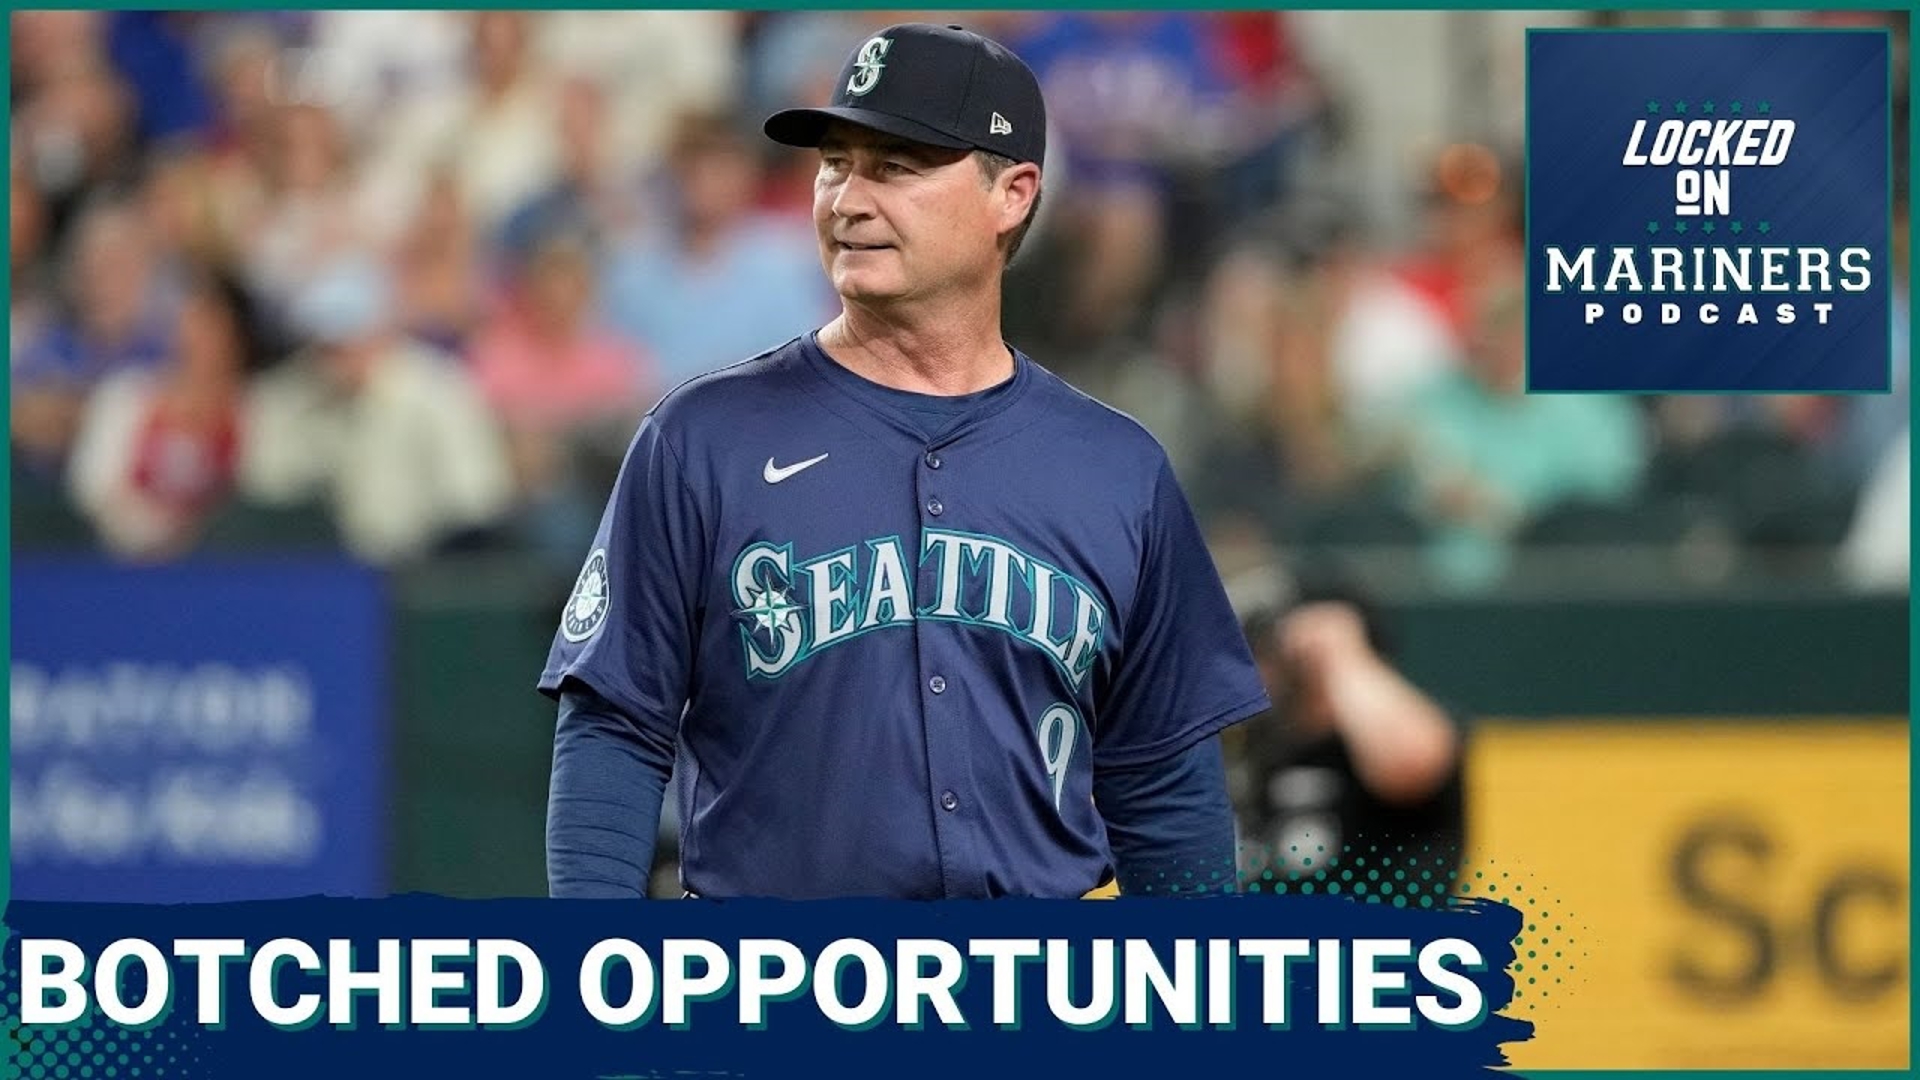 After a dominant showing in the series opener, the Mariners were sloppy across the board in their 5-1 loss to the Rangers on Wednesday night.